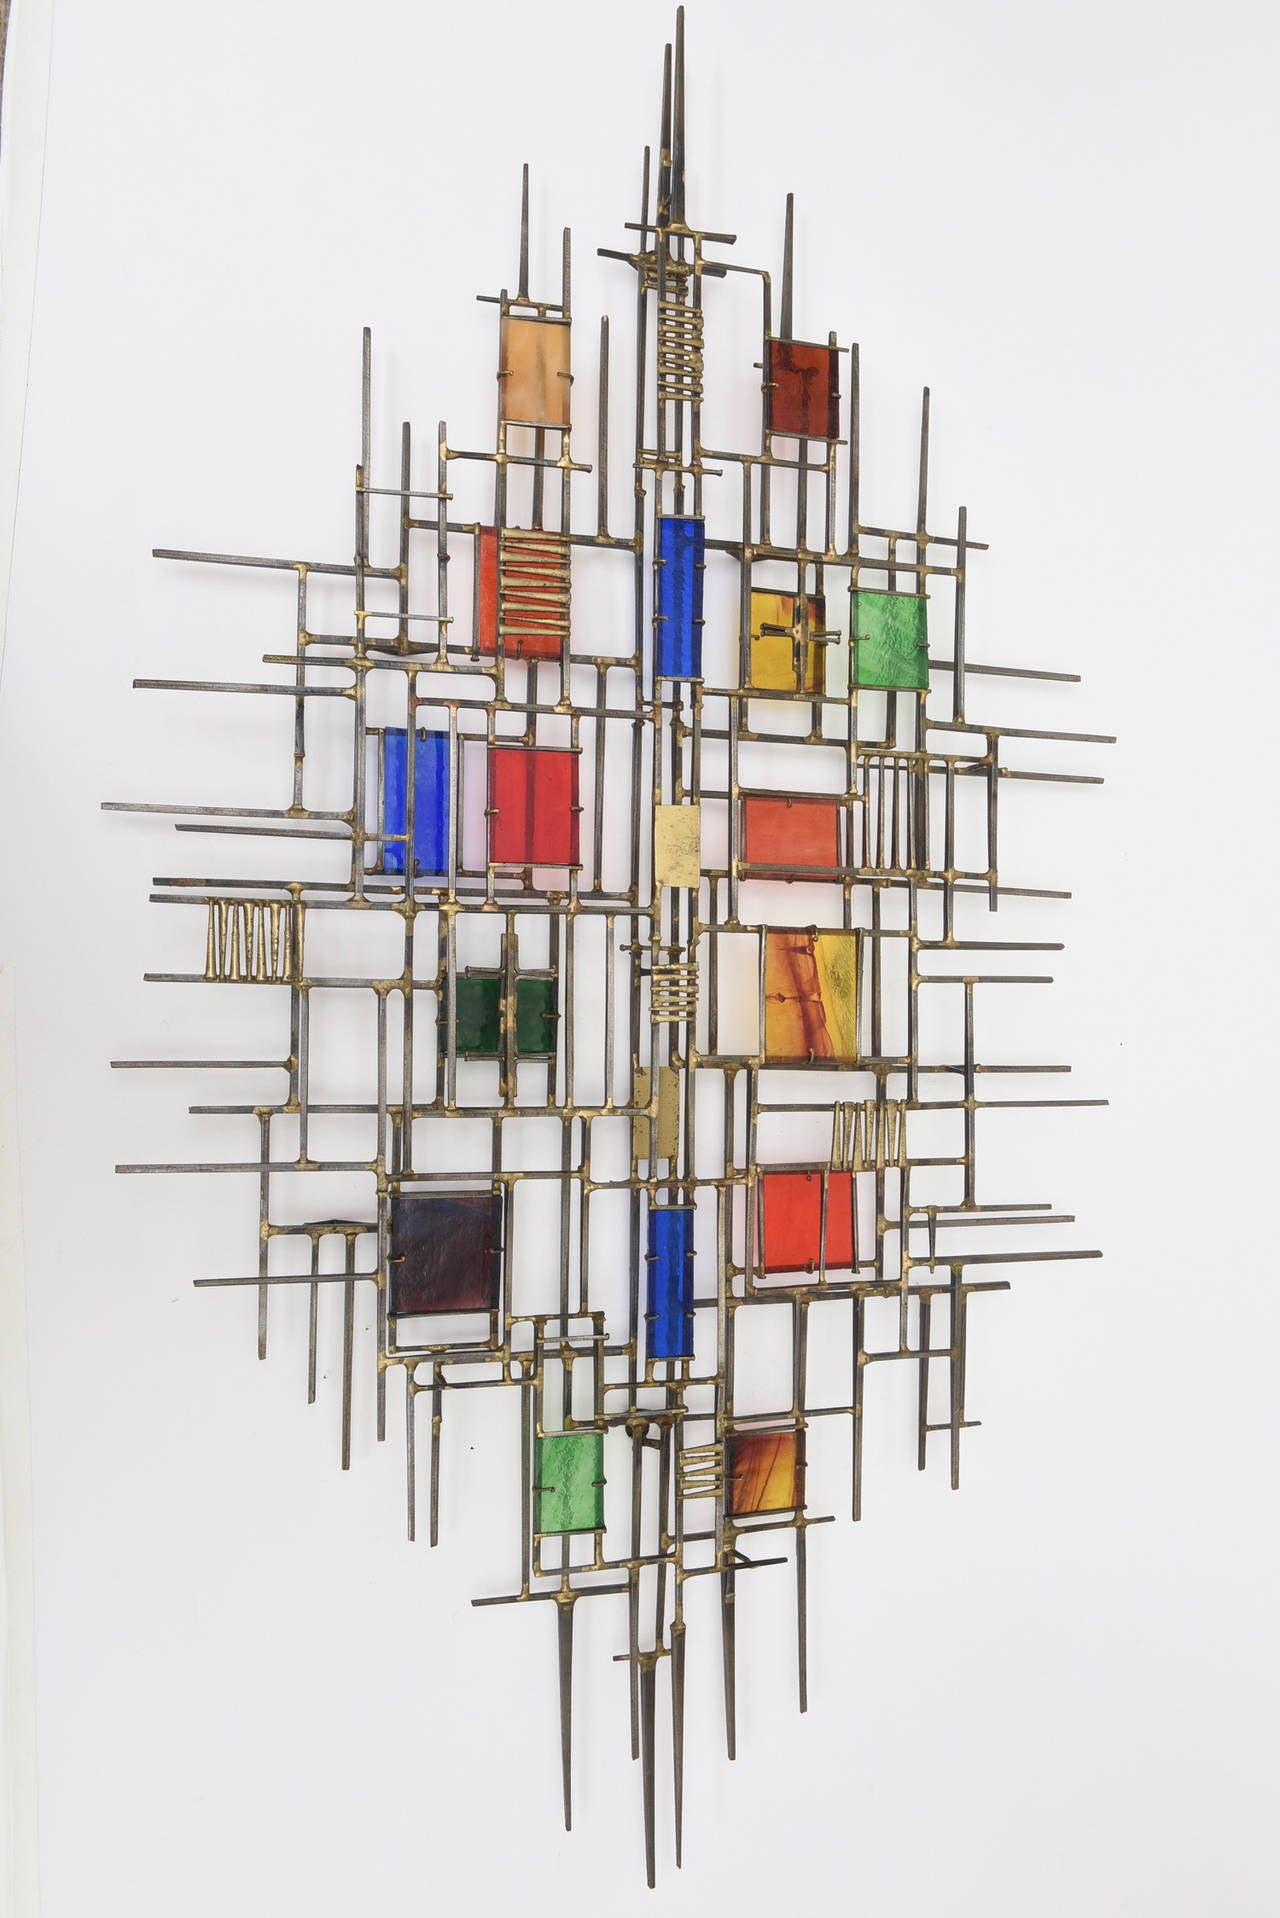 This amazing rare, brutalist and modernist wall sculpture attributed to Coffey is hard to find. The glass panels in a myriad of colors is amazing set against the brass and nails. Truly a piece of art! Even some of the glass panels have a rainbow